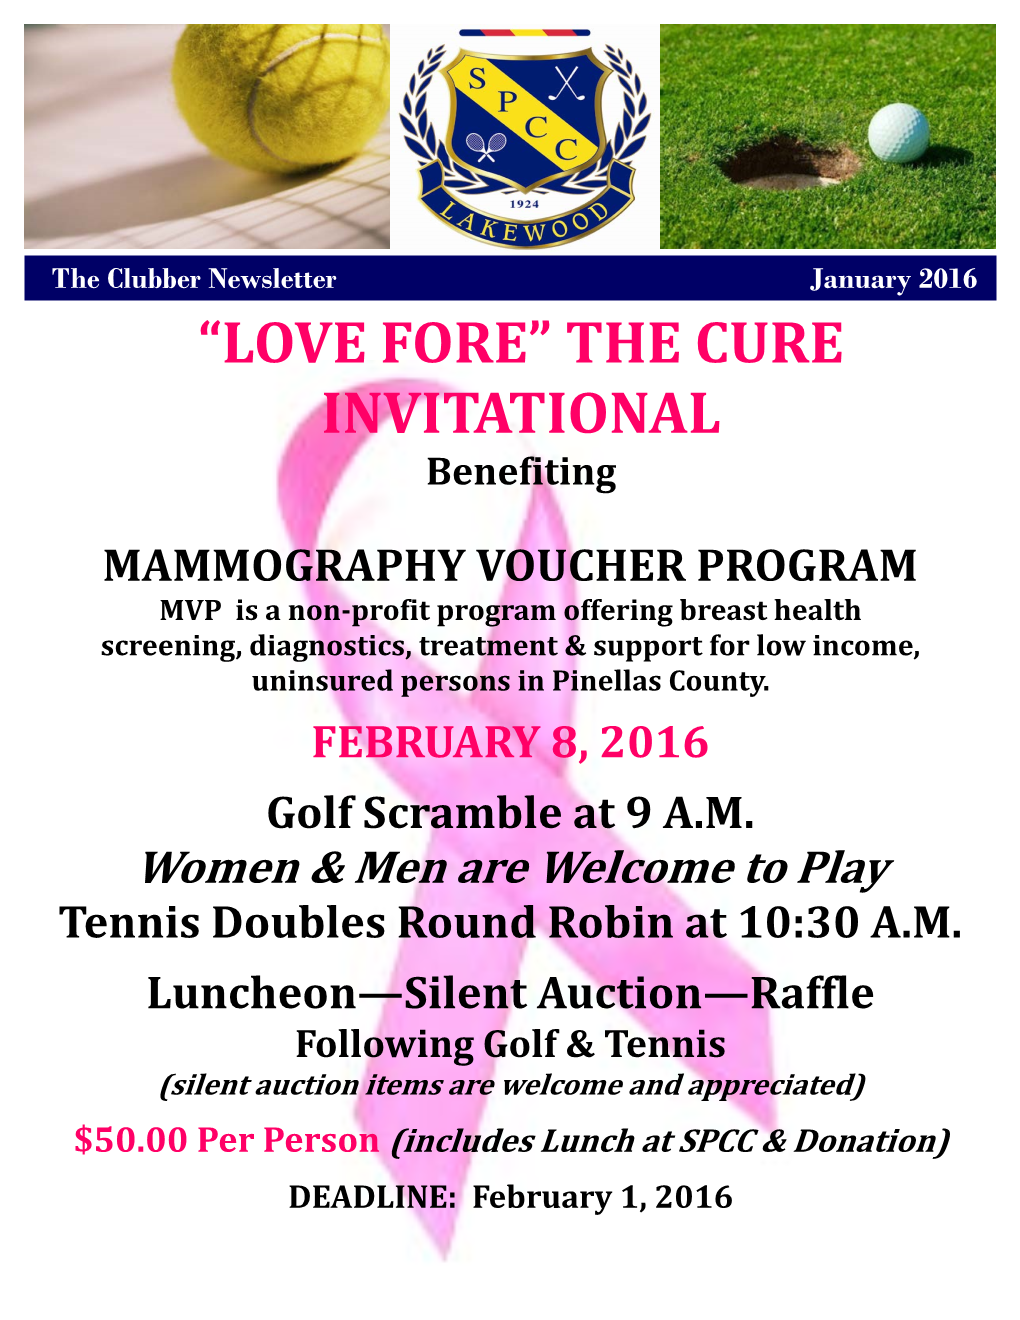 THE CURE INVITATIONAL Benefiting